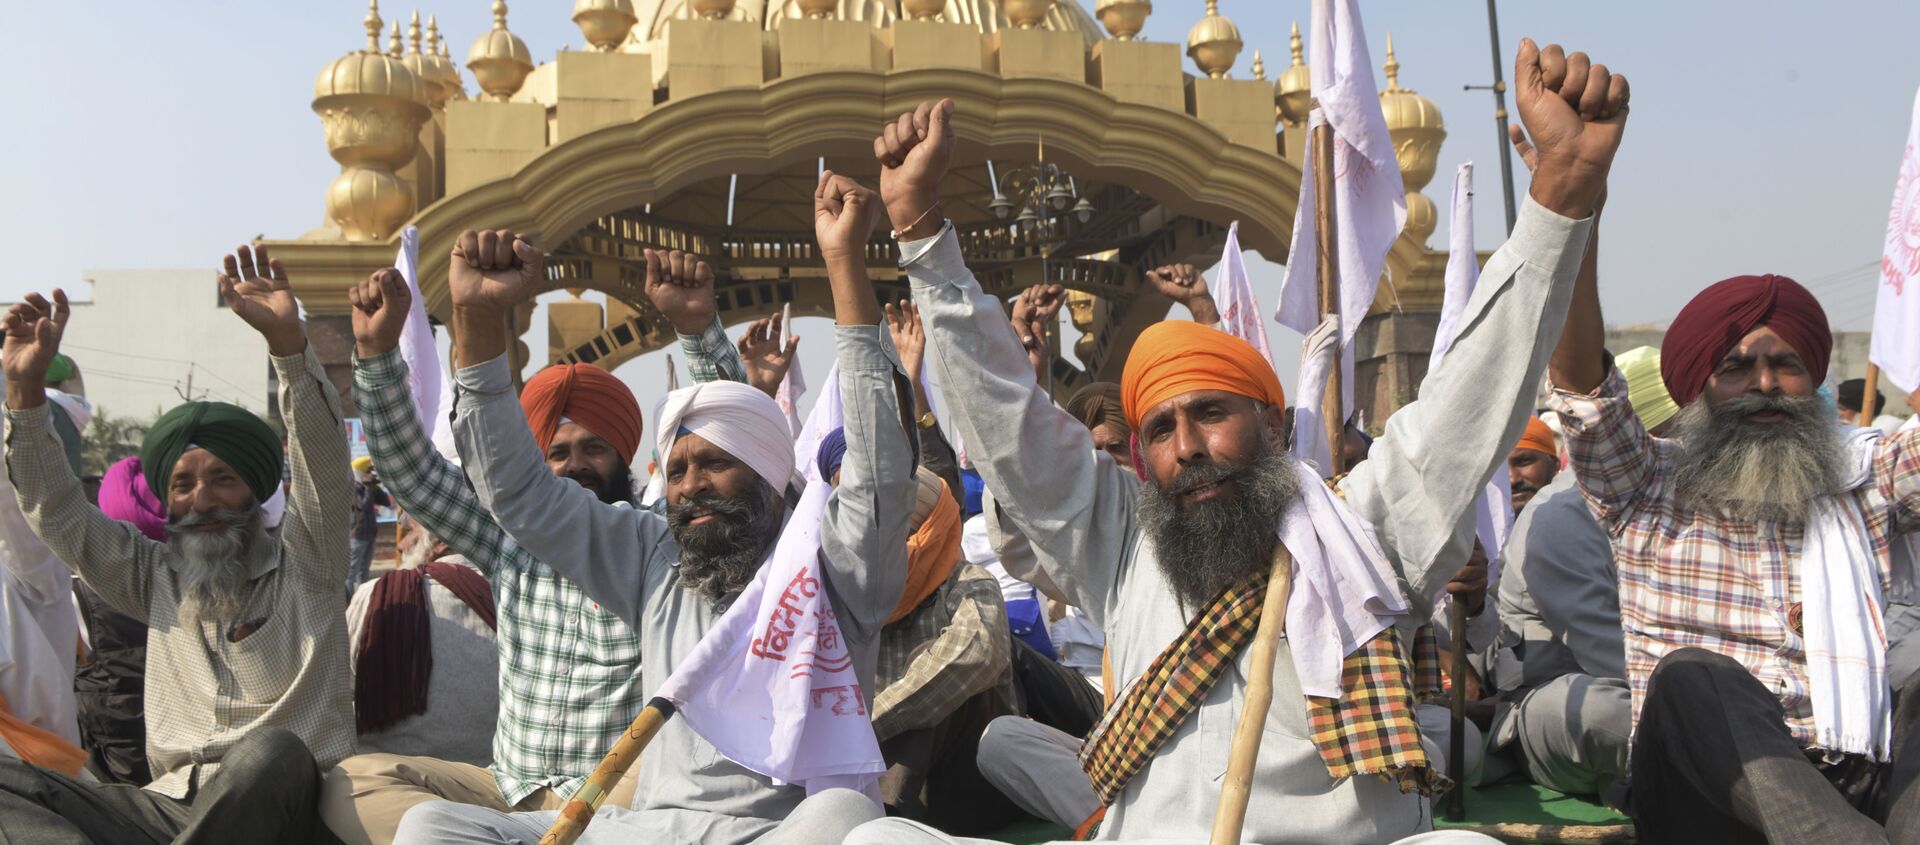 Farmers shout slogans as they block a road during a protest strike against the recent passing of agriculture reform bills in the parliament, at the golden entrance gate in Amritsar on 5 November 2020 - Sputnik International, 1920, 05.11.2020